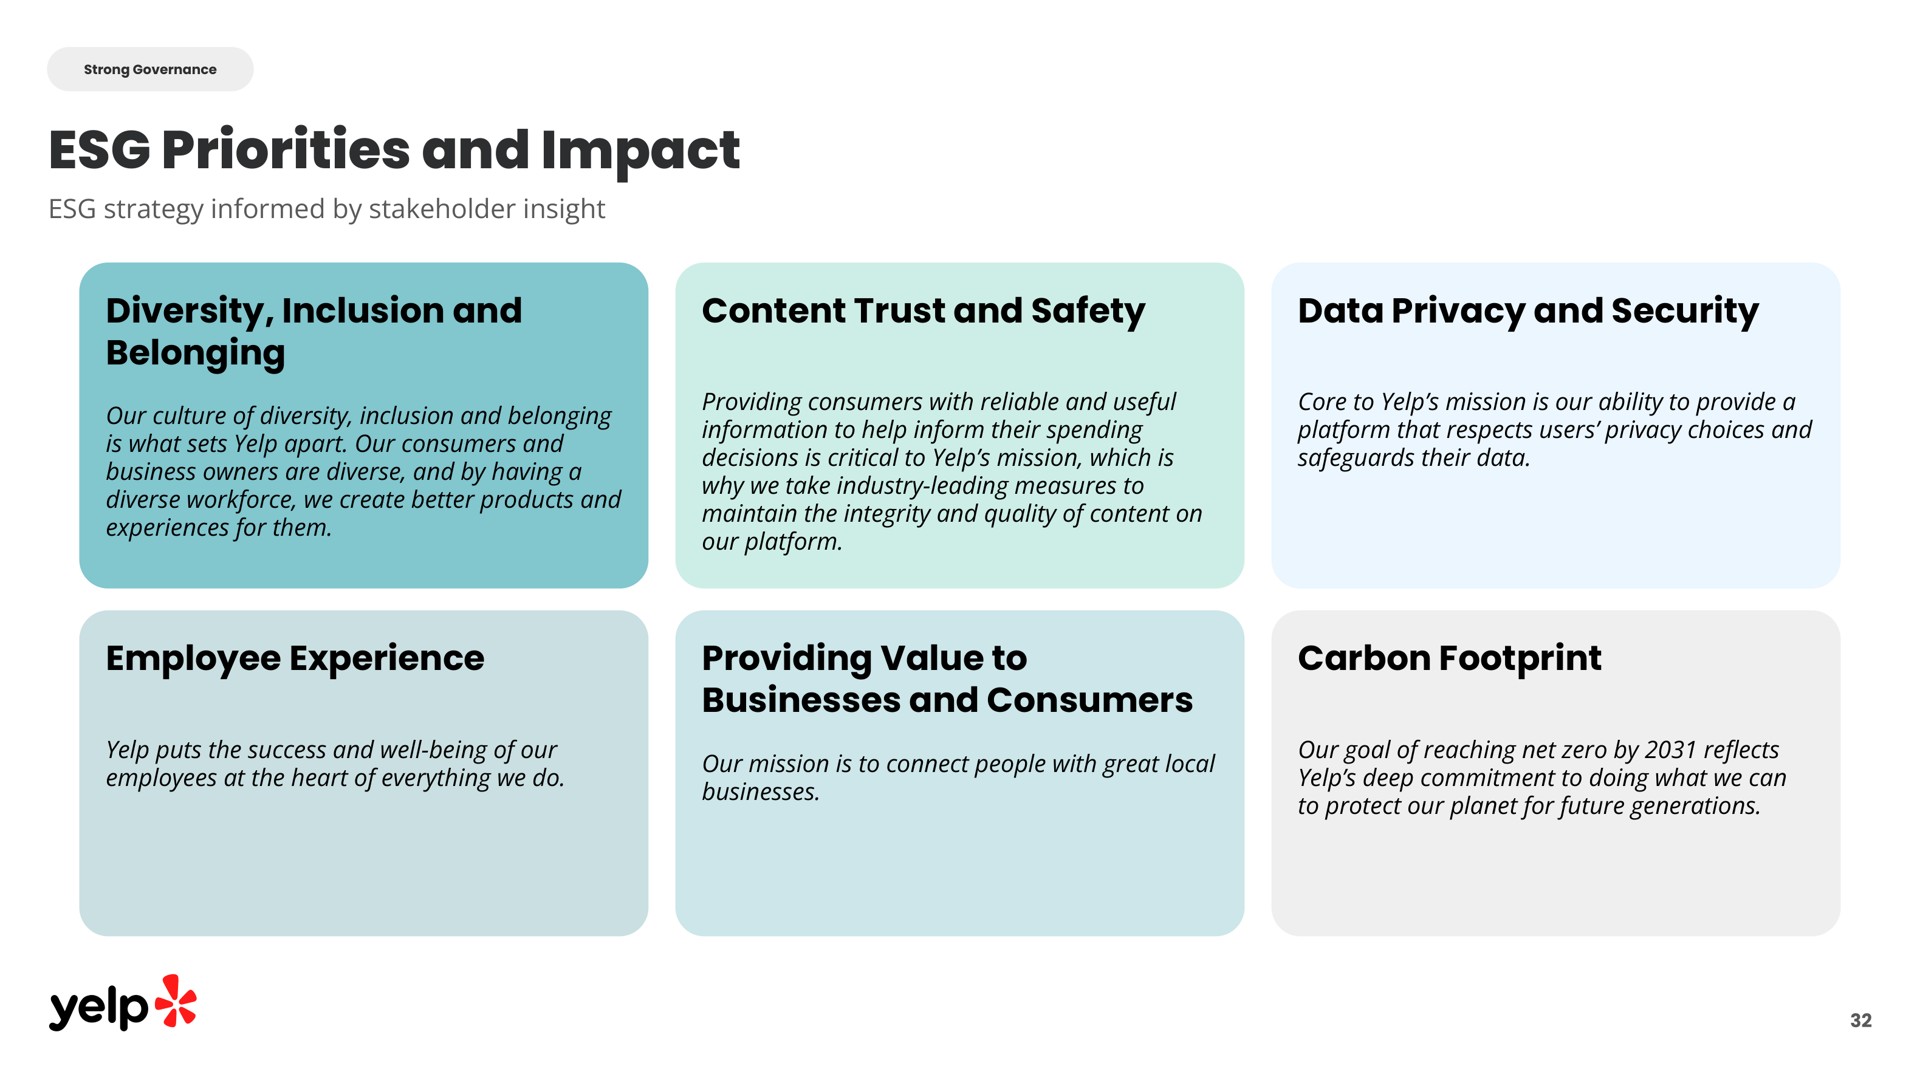 priorities and impact diversity inclusion and belonging content trust and safety data privacy and security employee experience providing value to businesses and consumers carbon footprint yelp | Yelp